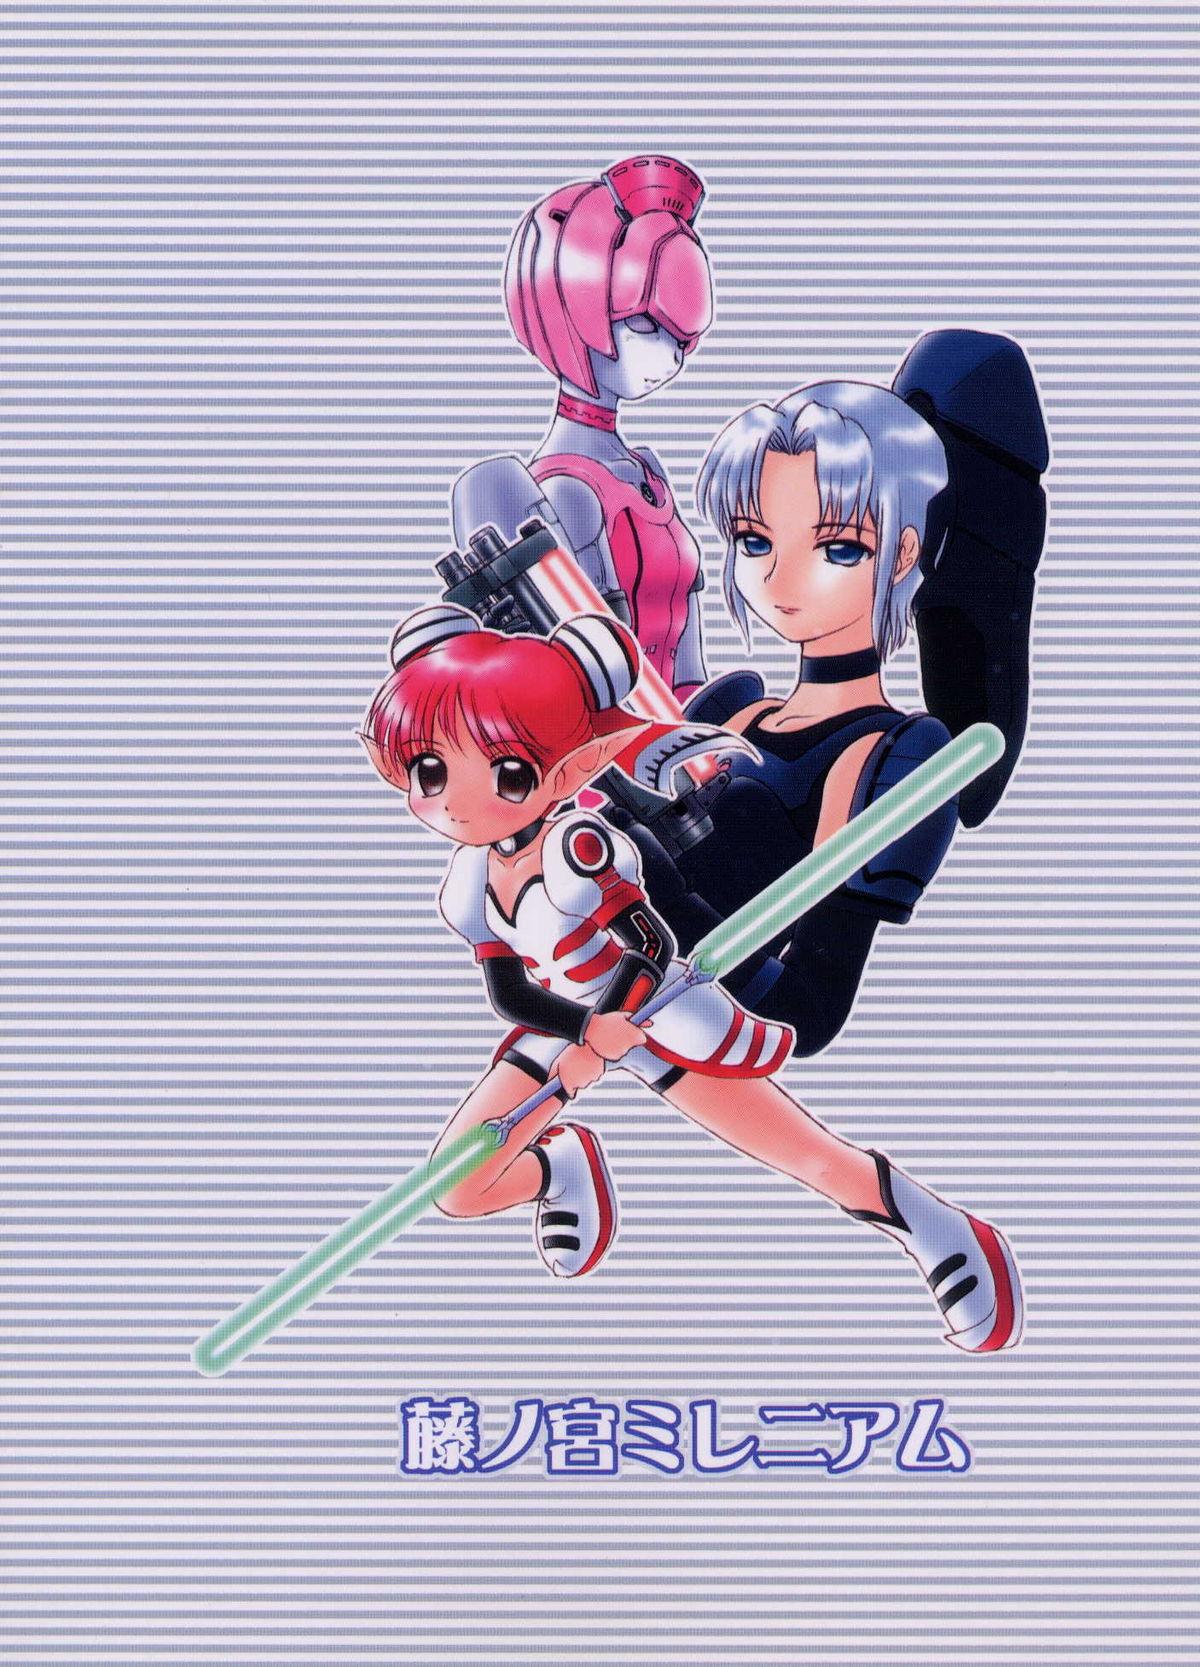 PSO fanbook edition 2 1